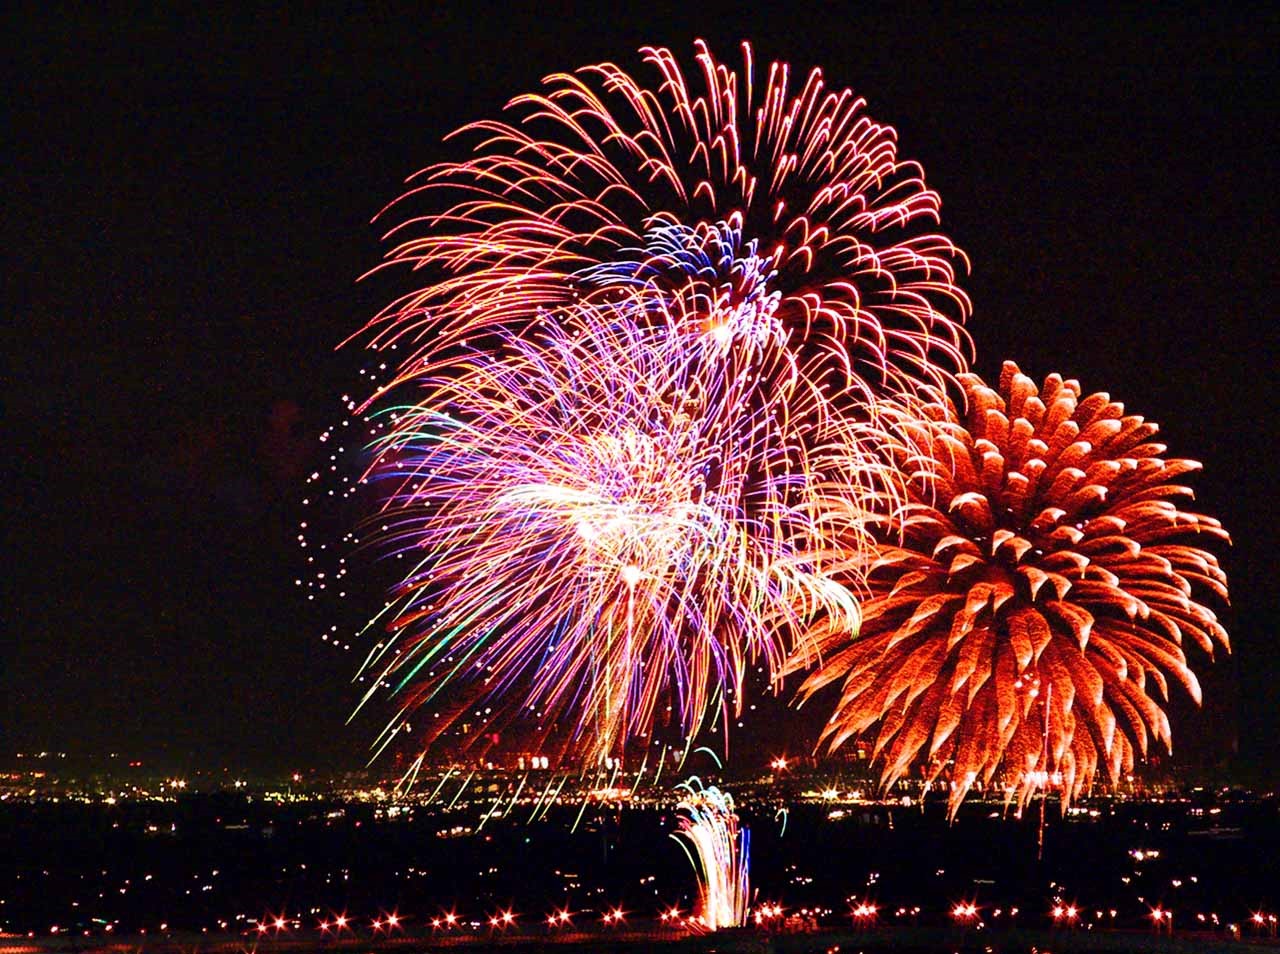 19-facts-about-kaboom-town-fireworks-show